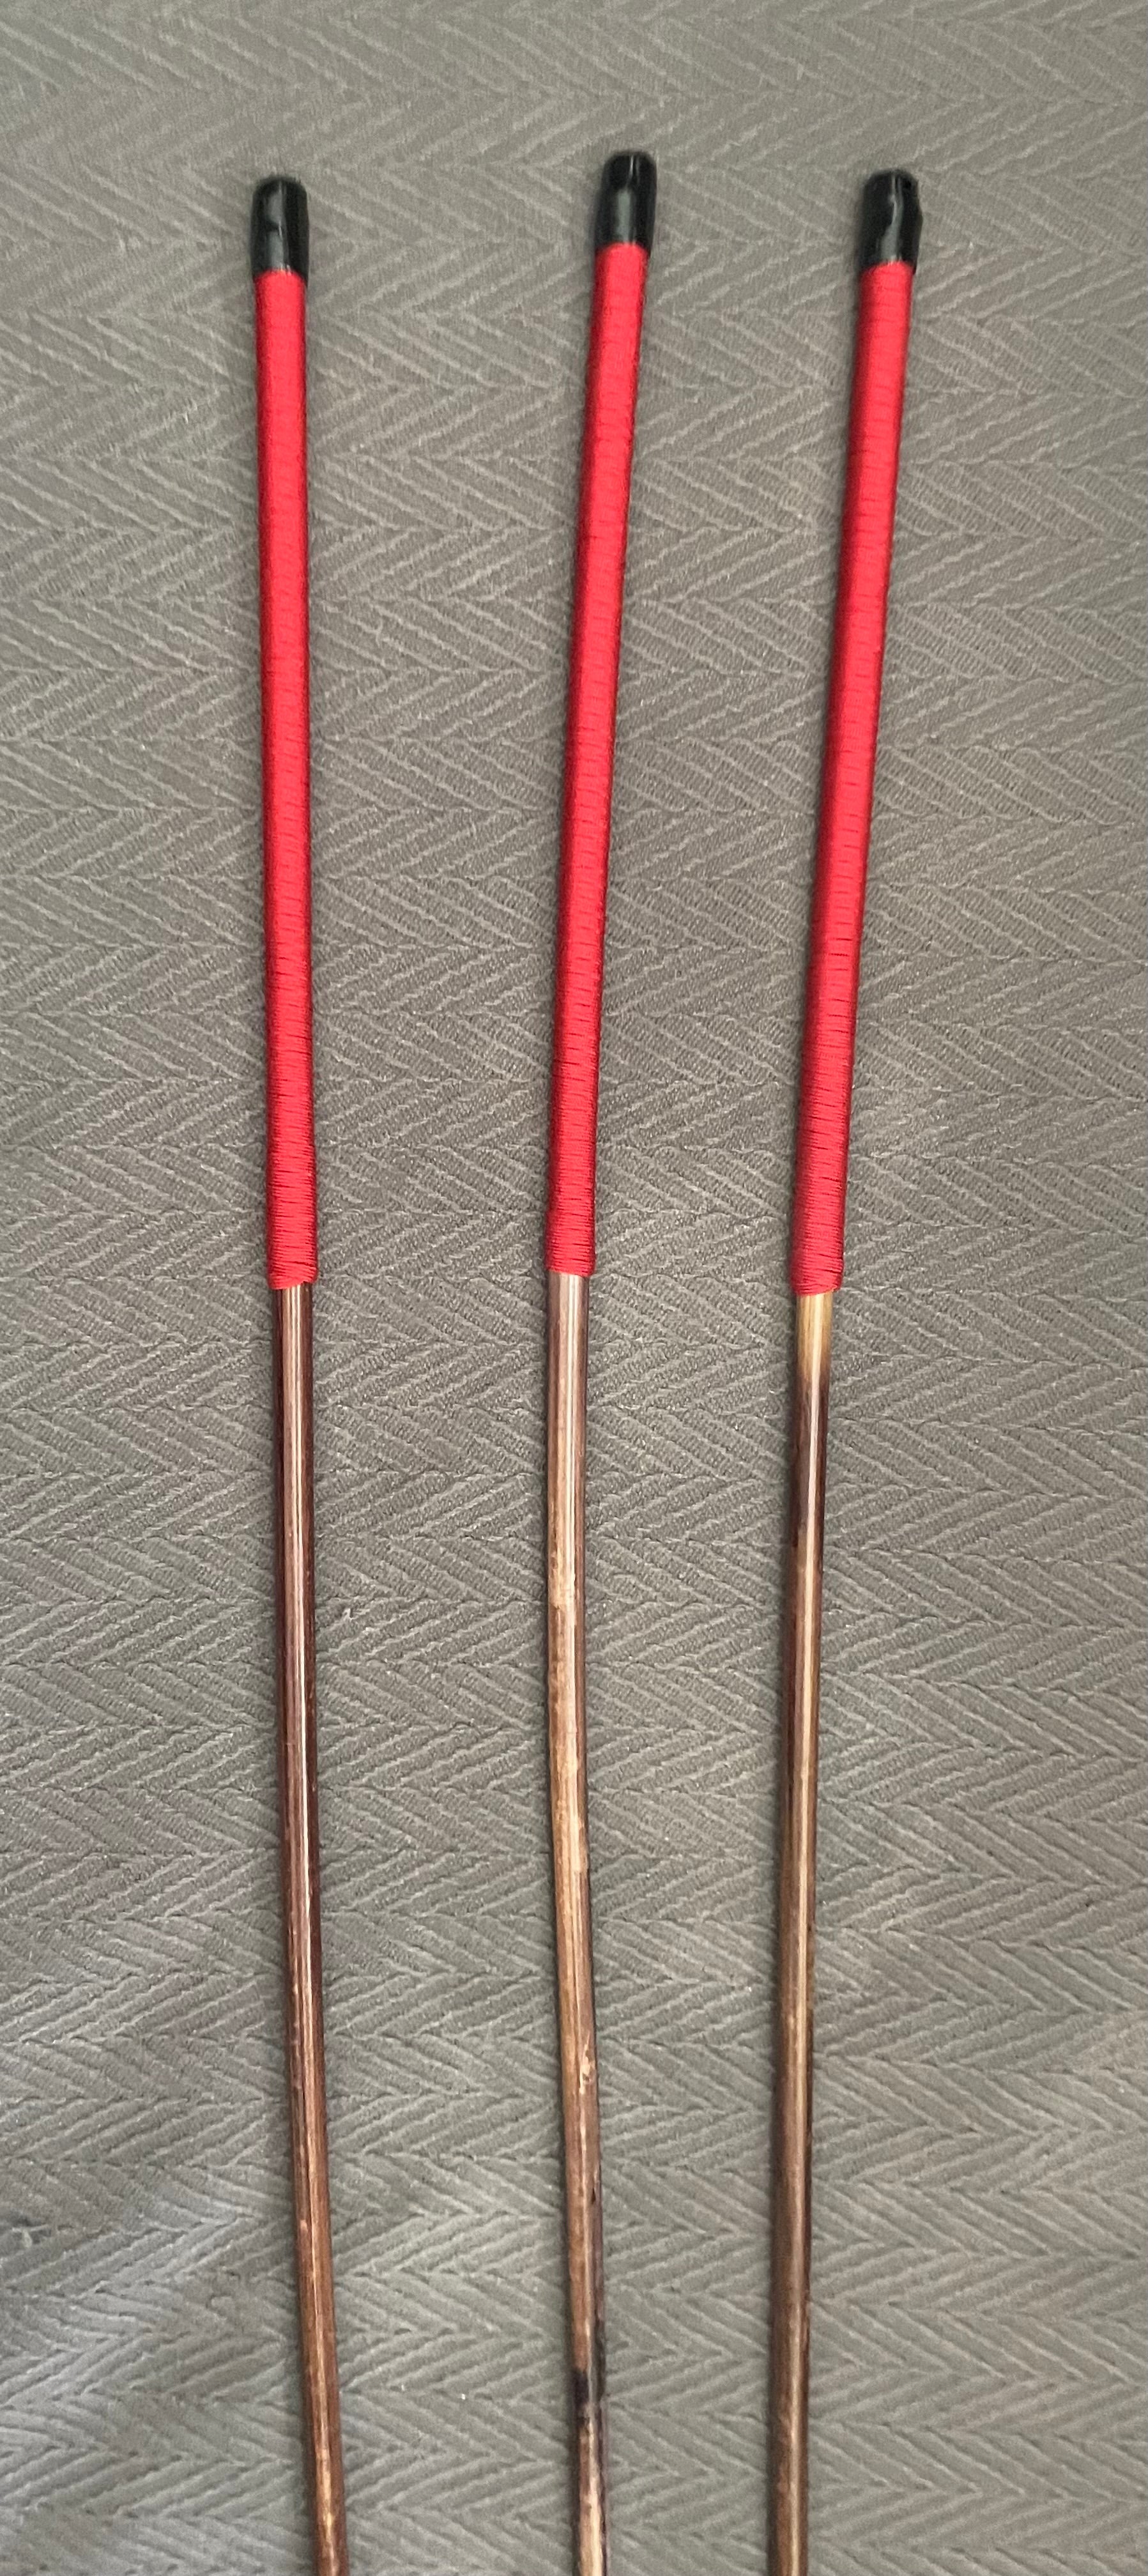 Set of 3 Knotless Smoked Dragon Canes / Ultimate No Knot Smoked Dragon Canes  - 92 to 94 cms Length - Red / Black Paracord Handles - Englishvice Canes